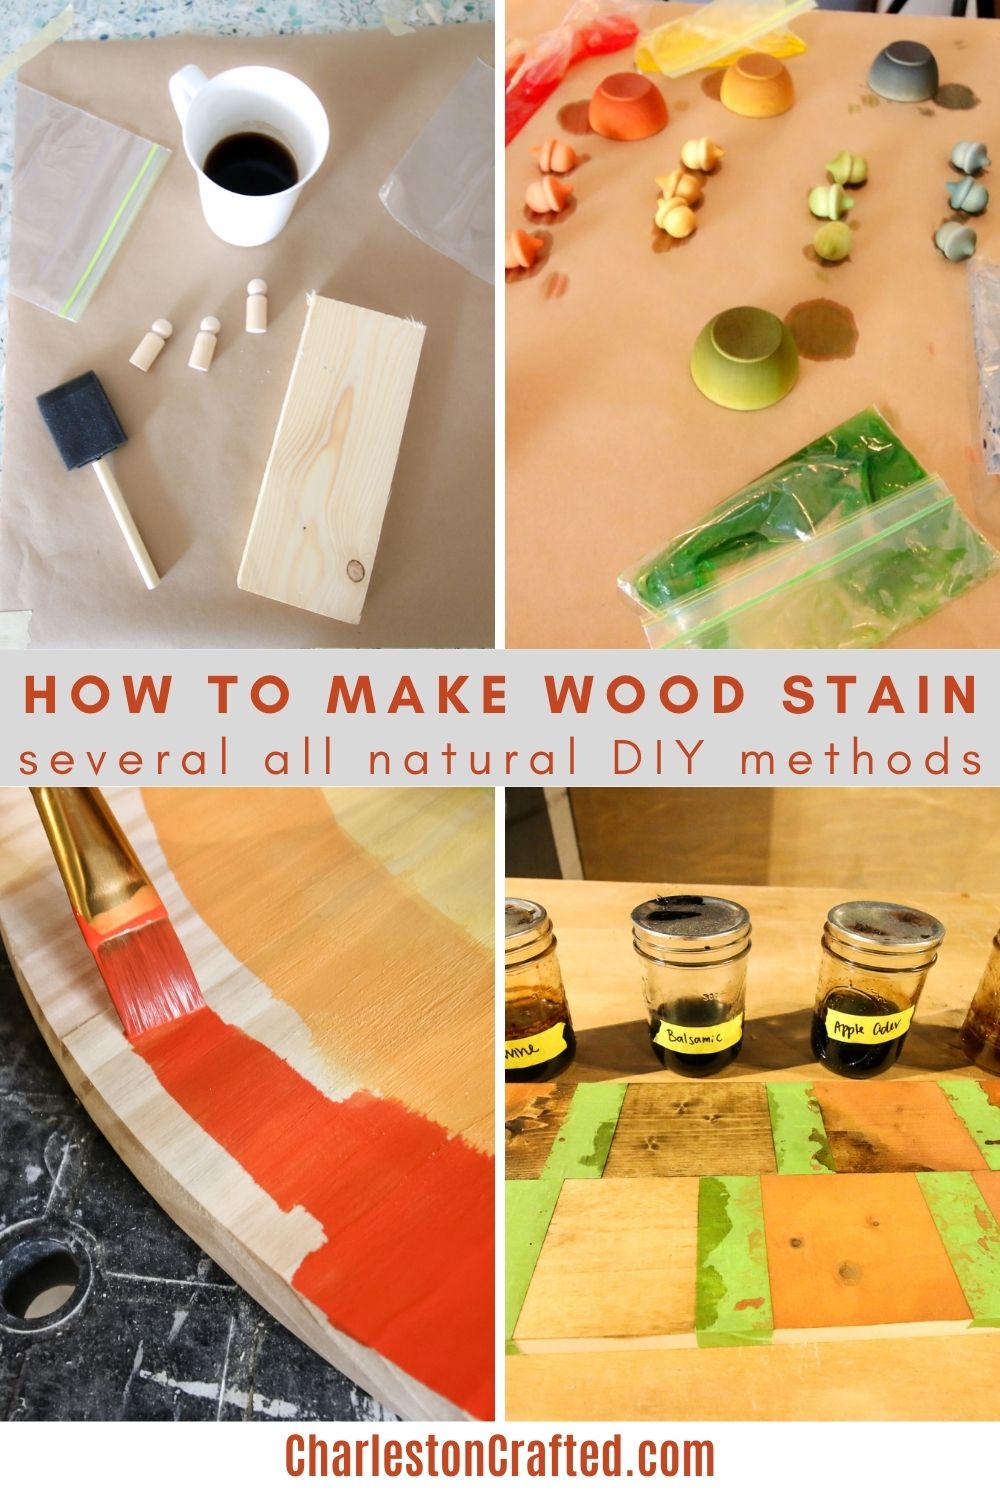 How to make wood stain: 5 easy methods